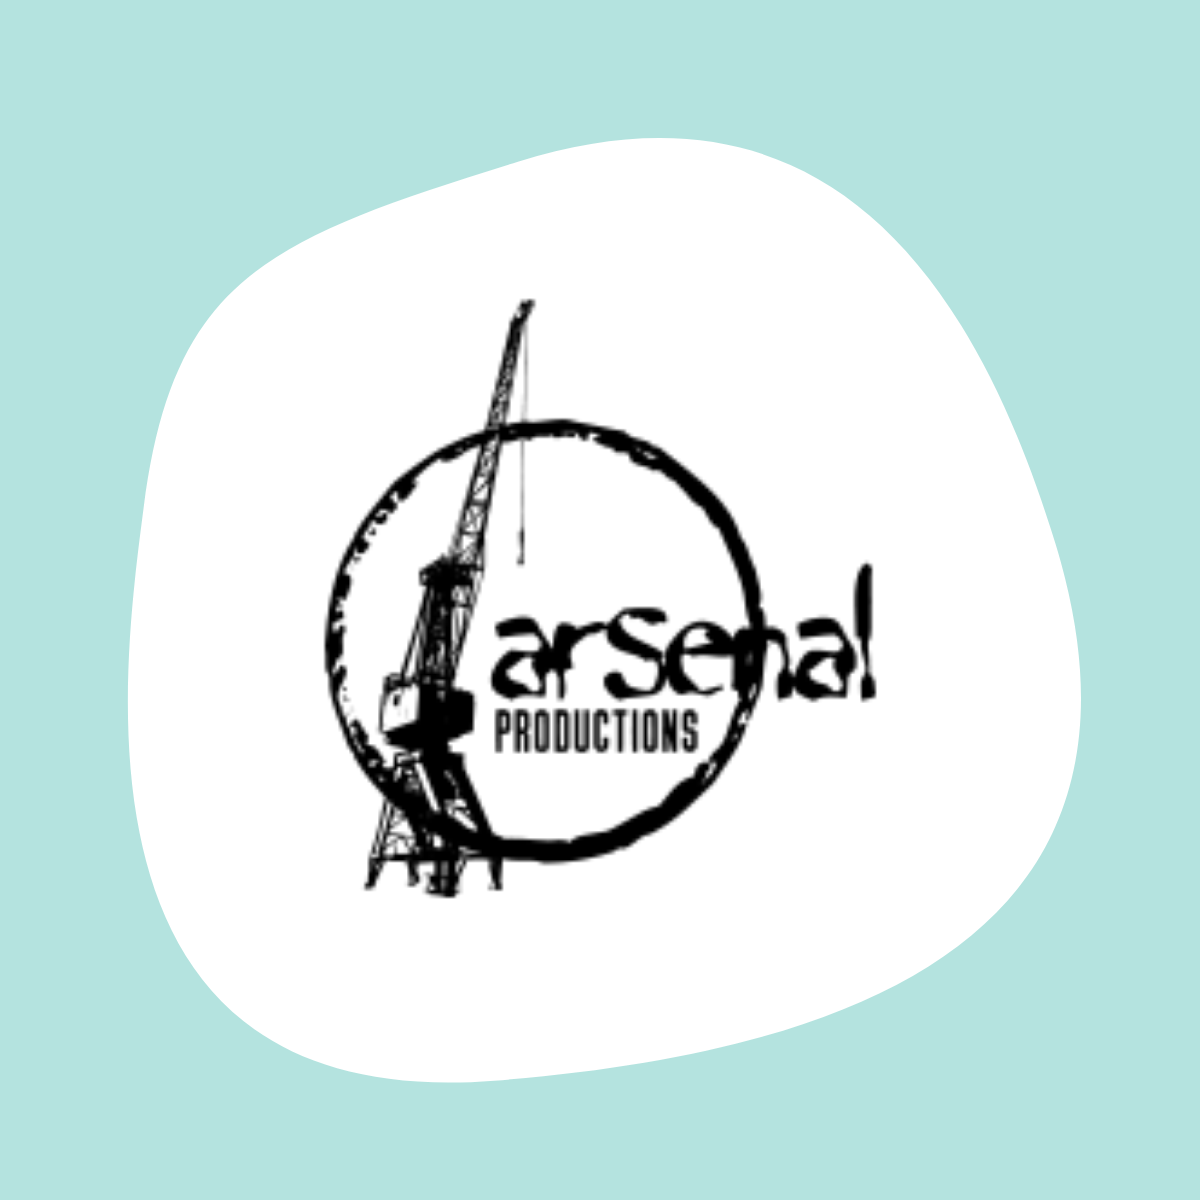 Arsenal Productions